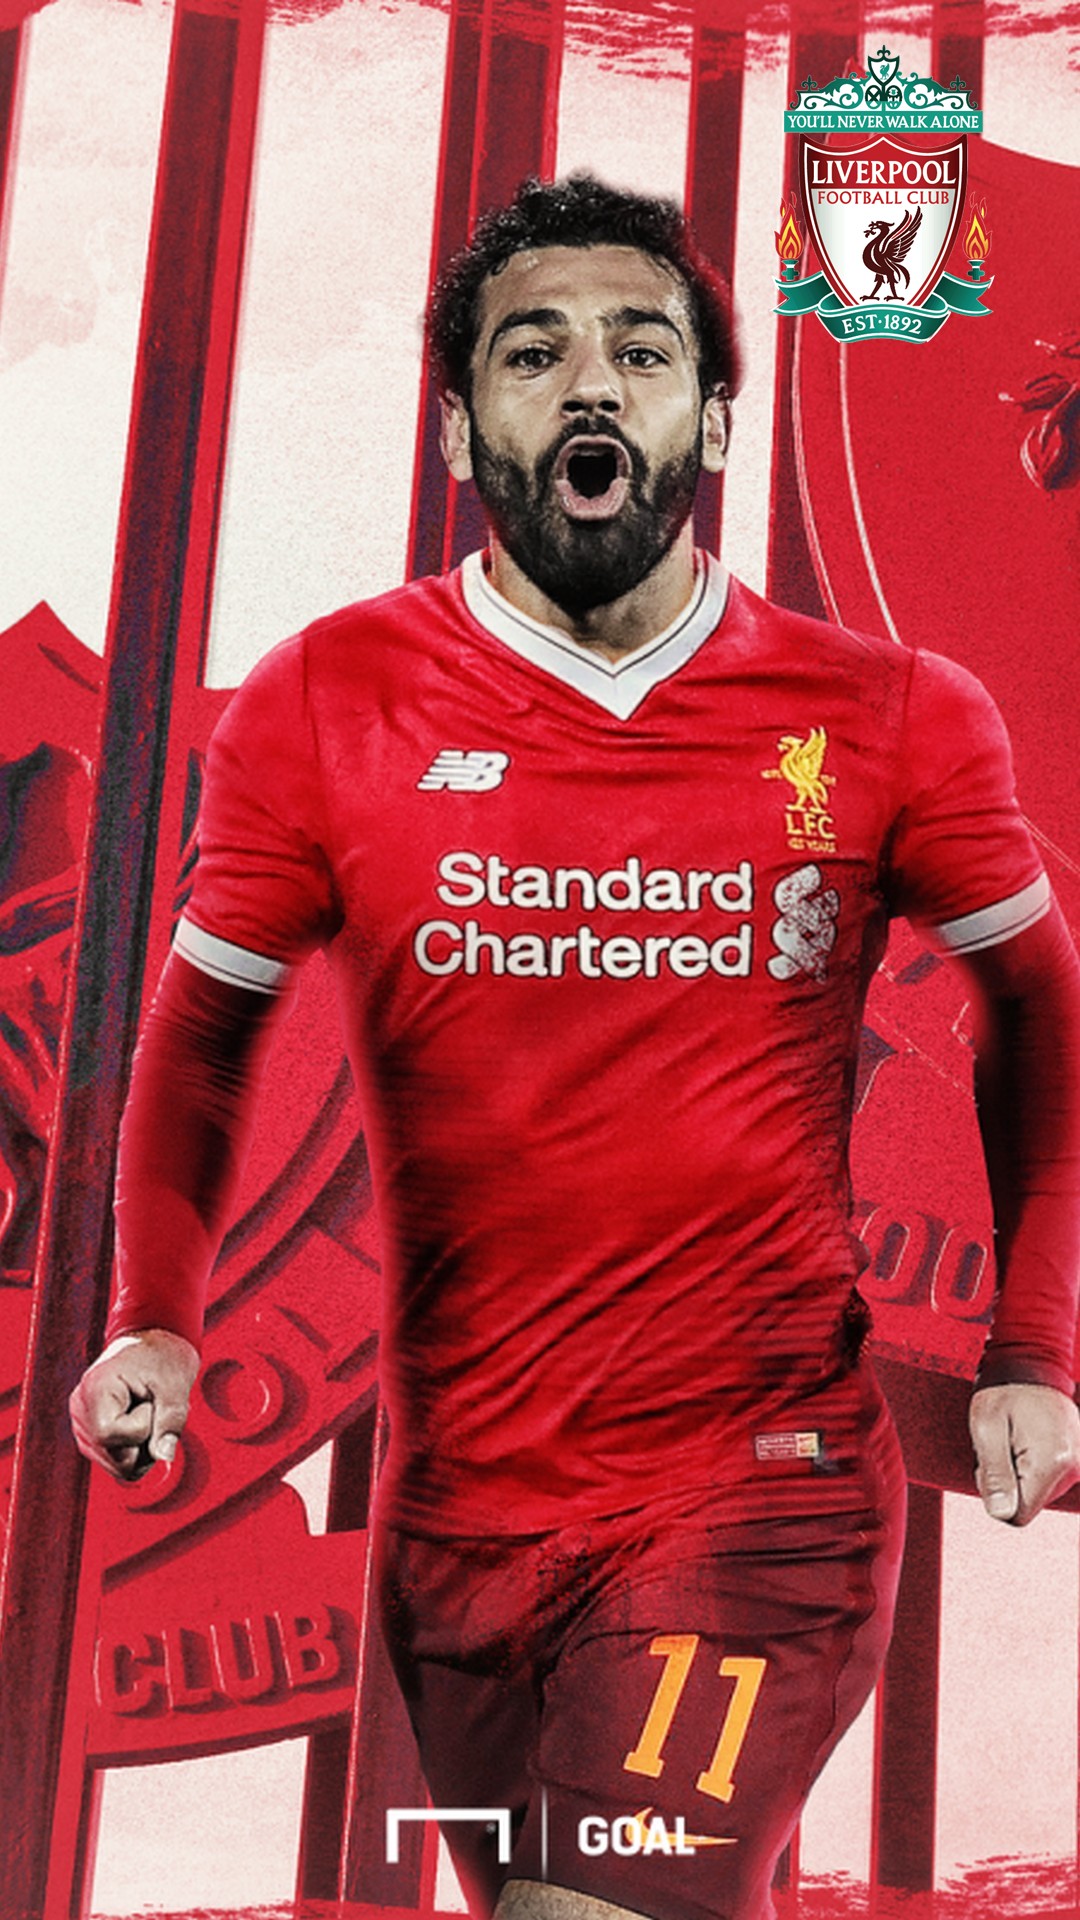 iPhone Wallpaper Mohamed Salah with image resolution 1080x1920 pixel. You can make this wallpaper for your iPhone 5, 6, 7, 8, X backgrounds, Mobile Screensaver, or iPad Lock Screen